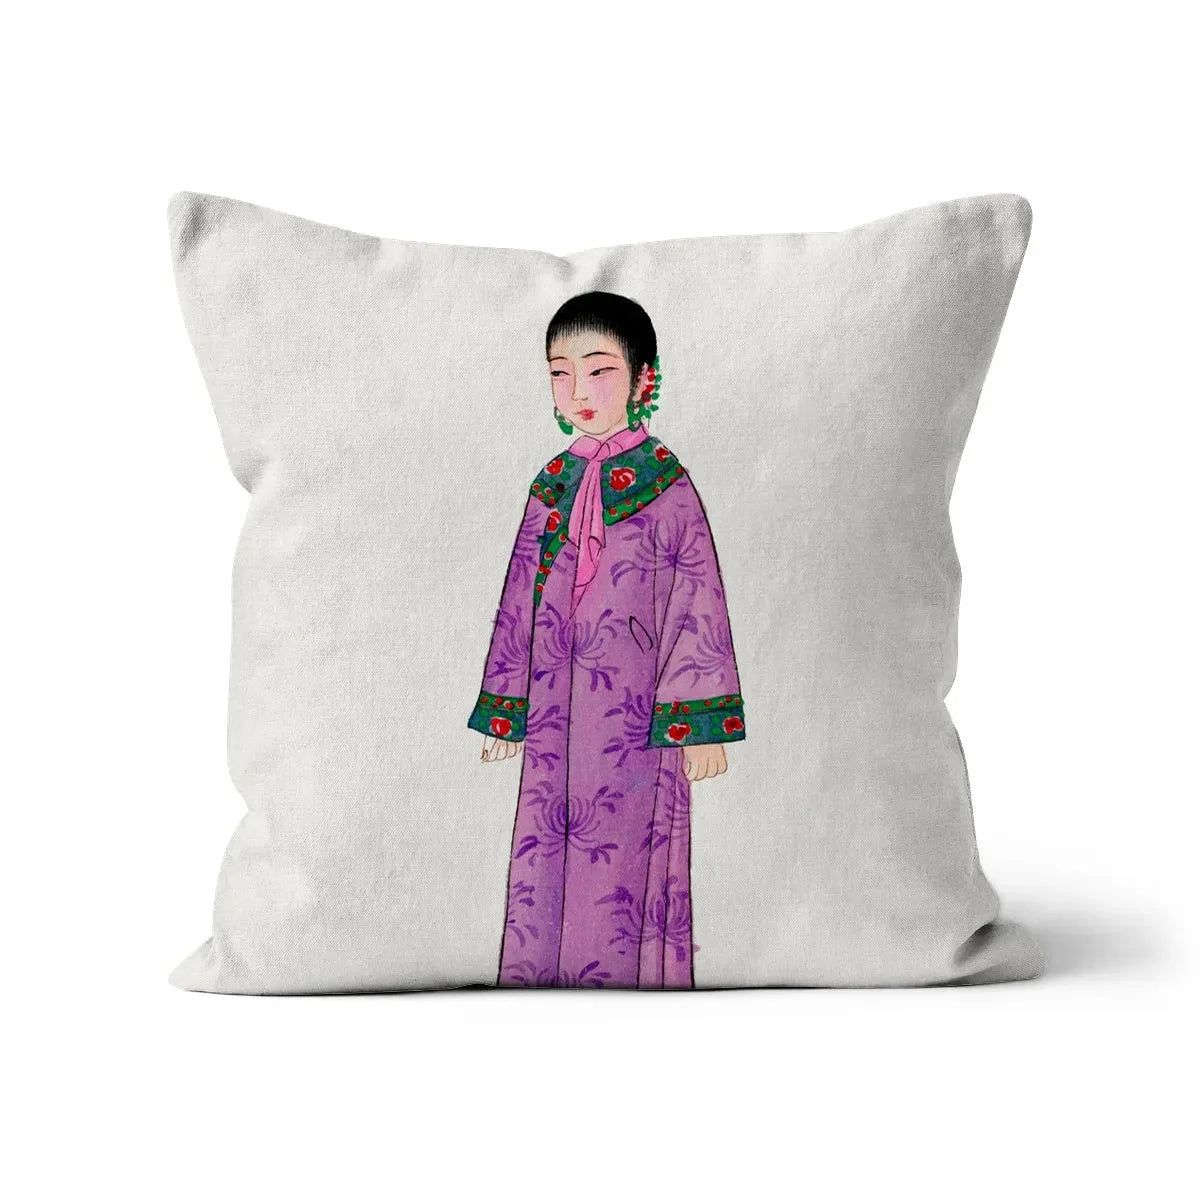 Chinese Noblewoman In Manchu Couture Cushion - Linen / 16’x16’ - Throw Pillows - Aesthetic Art